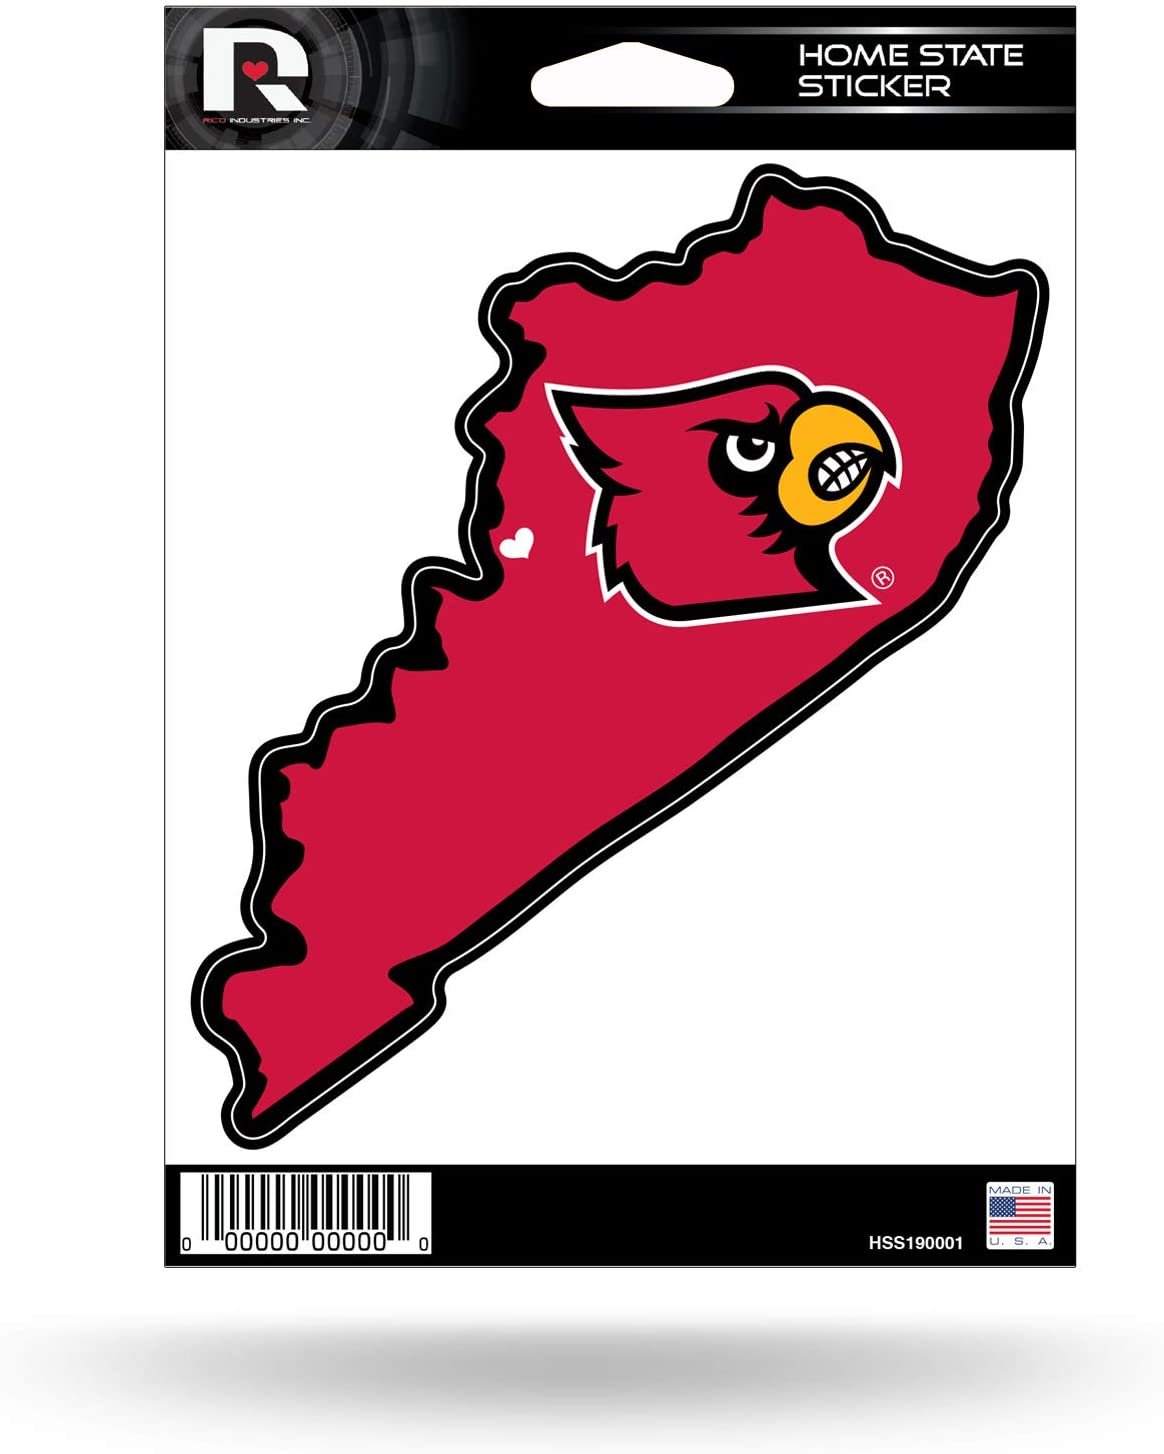 University of Louisville Cardinals 5 Inch Sticker Decal, Home State Design, Flat Vinyl, Full Adhesive Backing